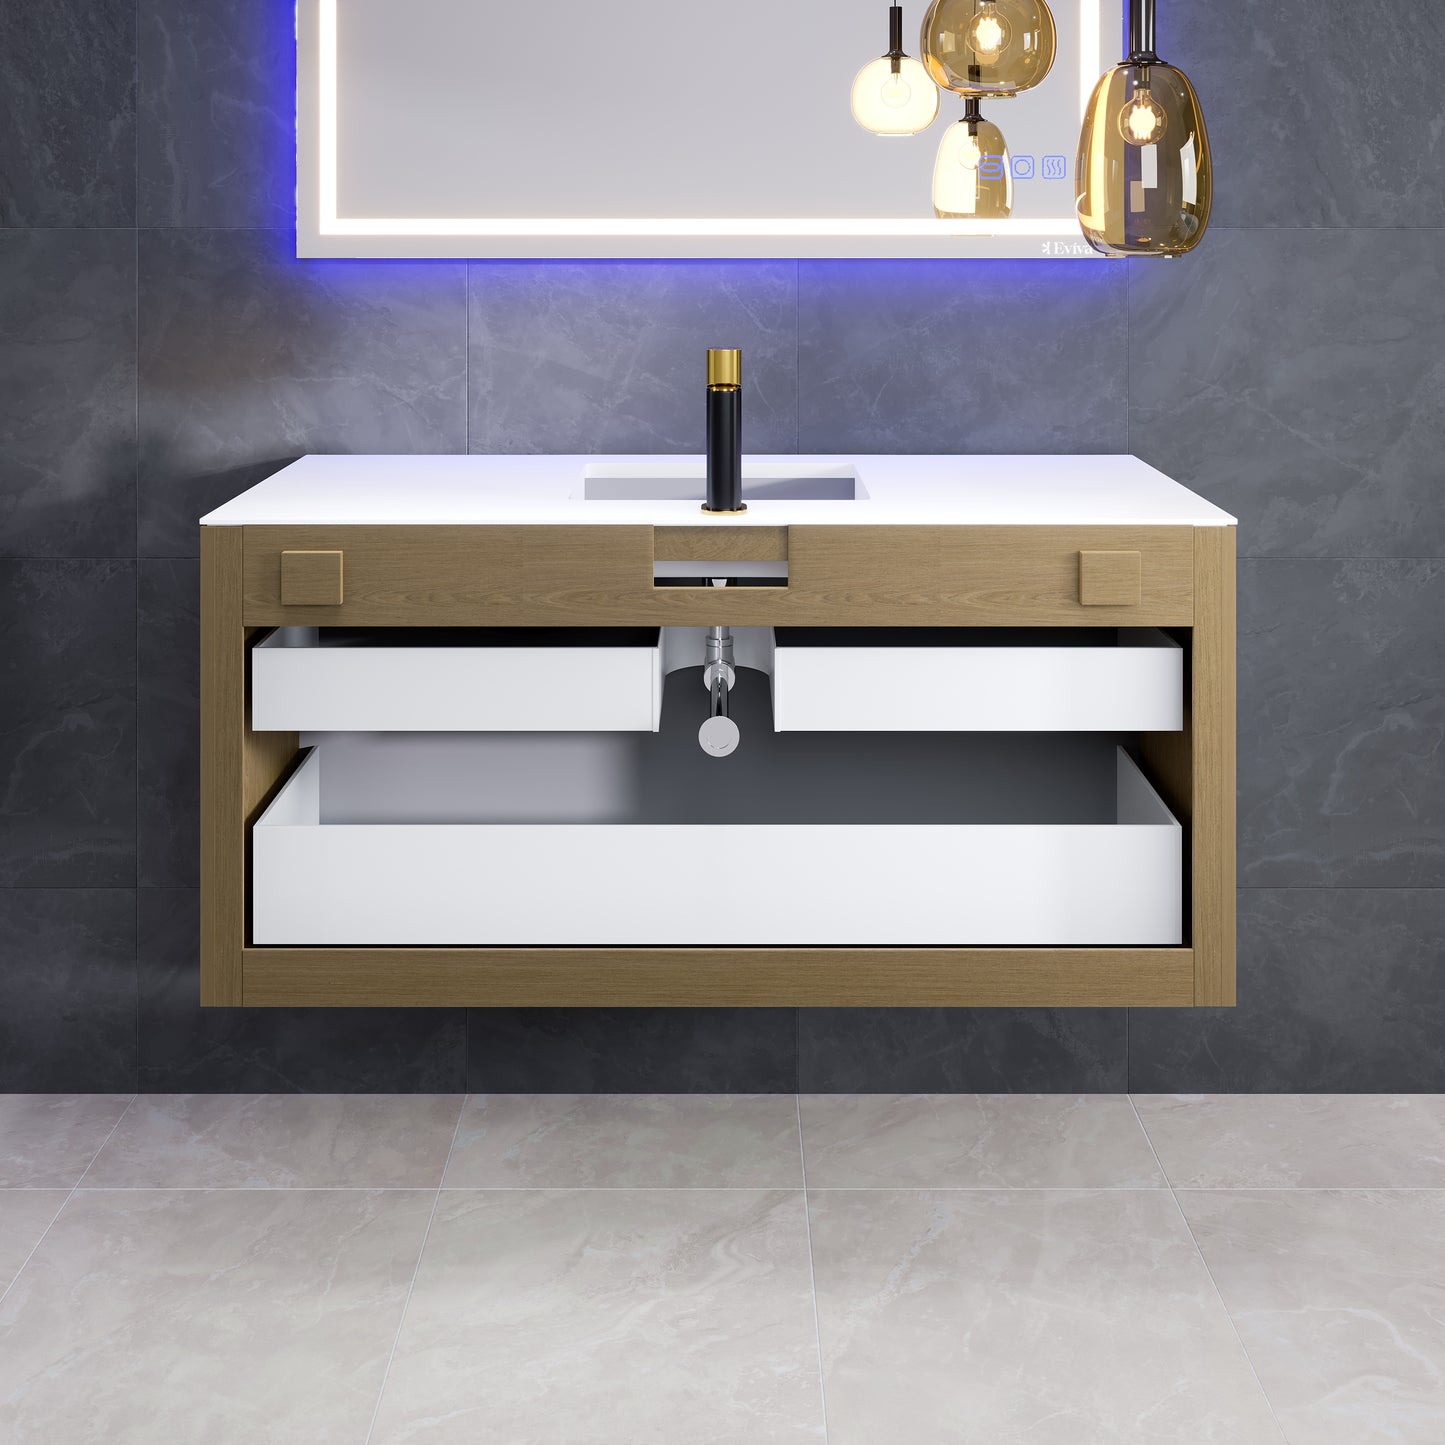 Mosaic 48"W x 20"D Natural Oak Bathroom Vanity with Solid Surface Countertop and Integrated Sink